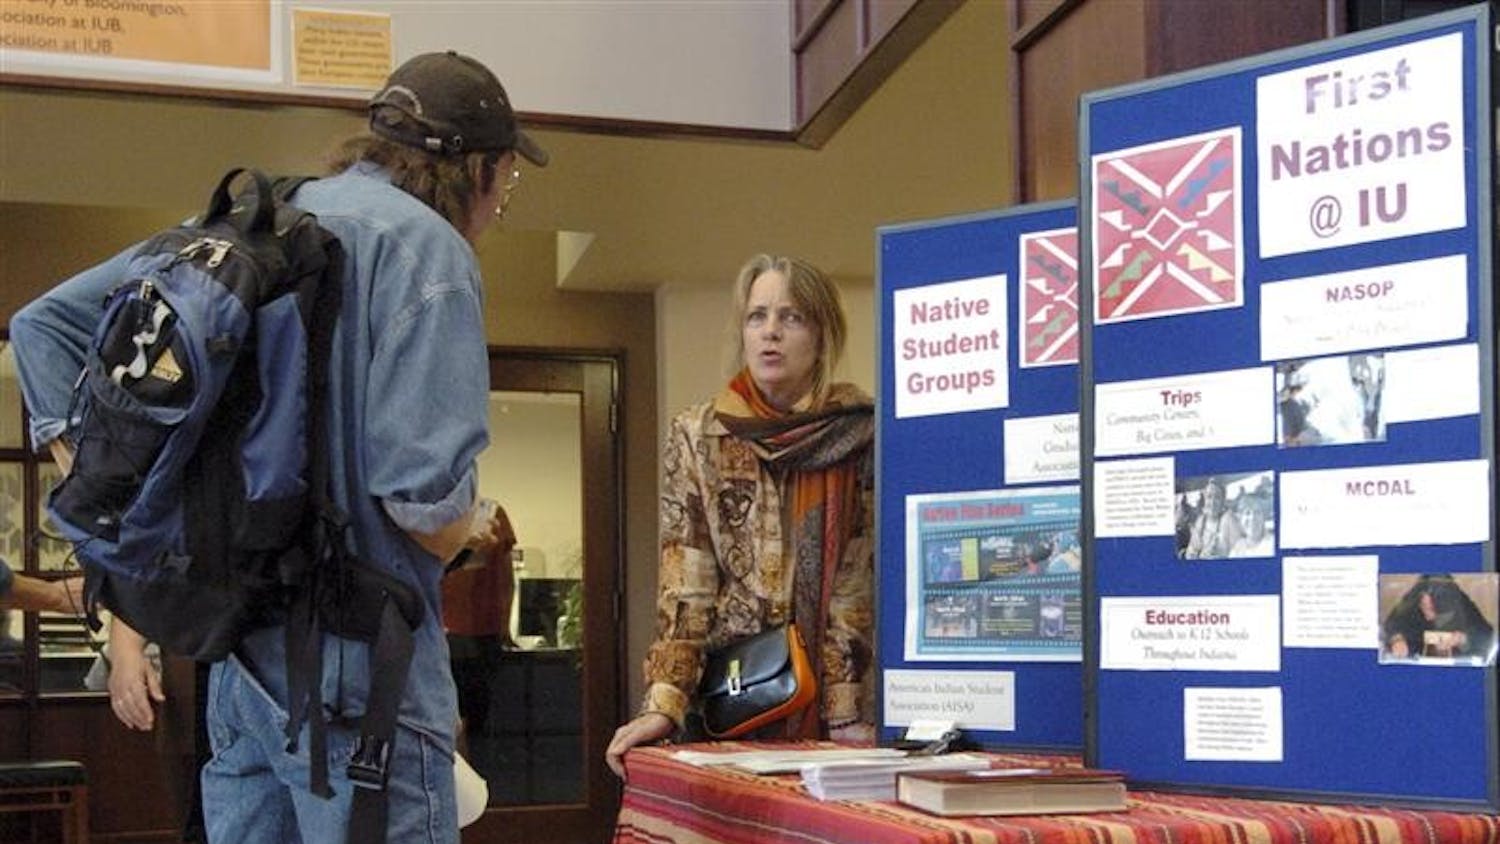 Program Assistant Mary Conners shares information with an attendee of an opening ceremony for National American Indian Heritage Month 
on Wednesday afternoon at the Showers City Hall Atrium.  The event was hosted by Indiana University's First Nations Educational and Cultural Center.